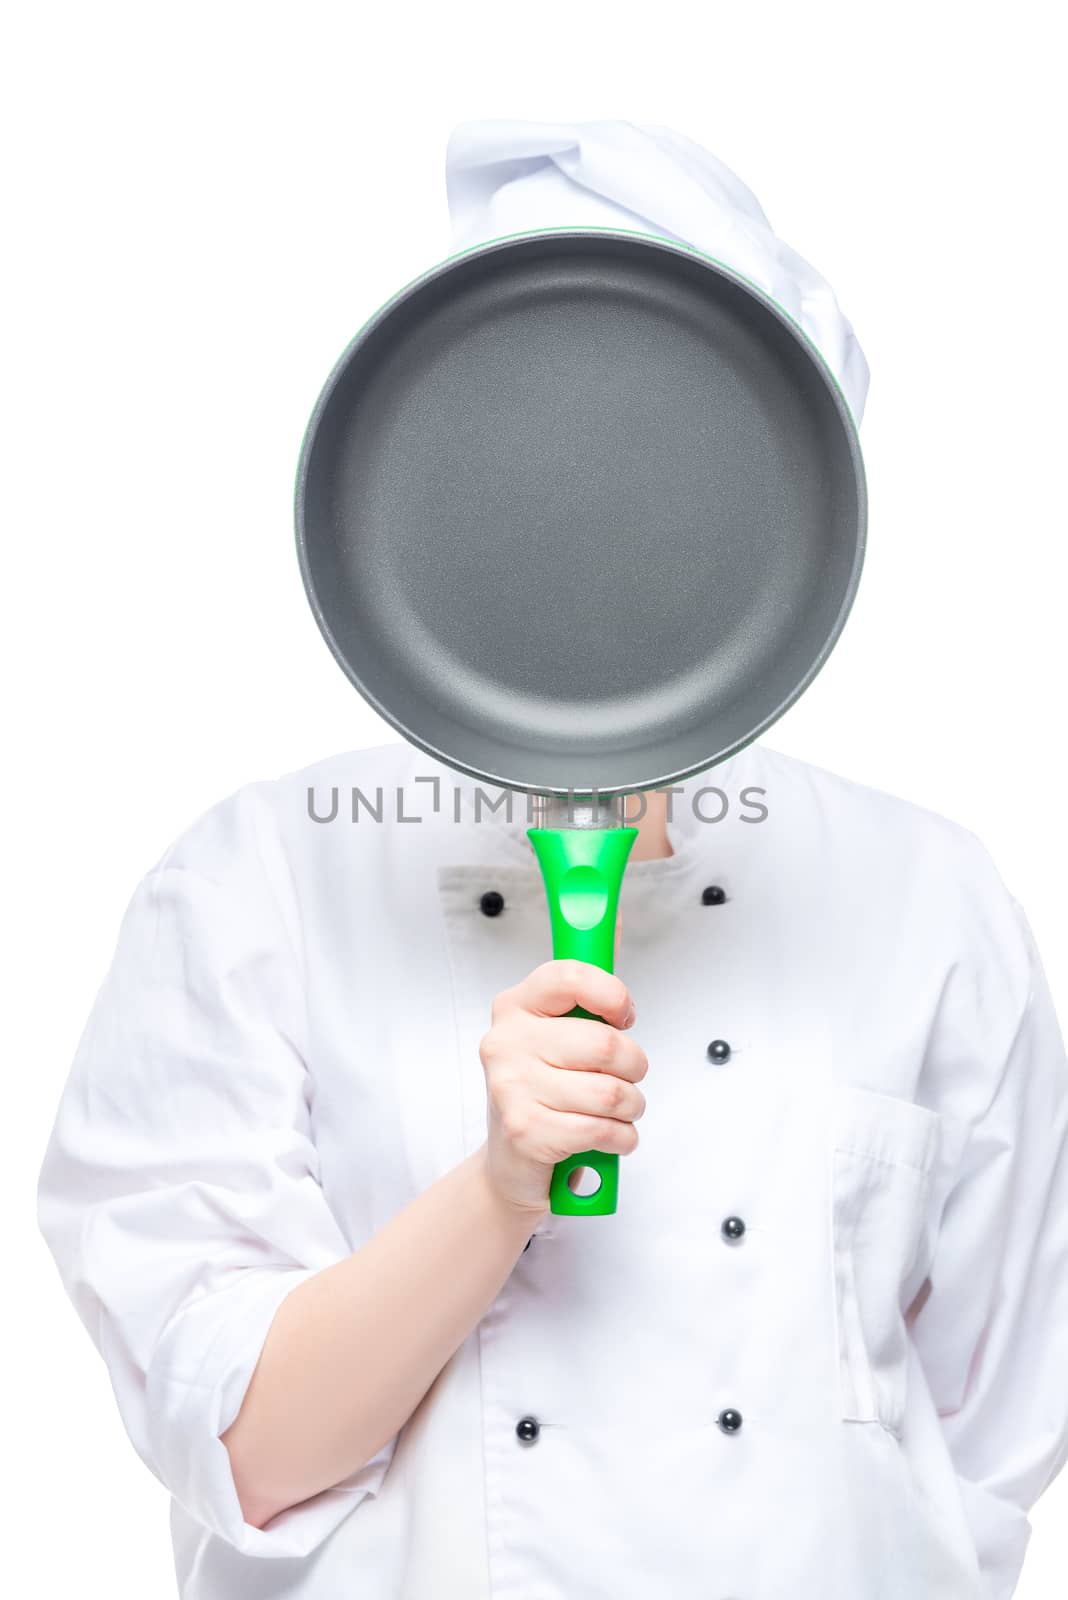 cook covers his face with a frying pan, studio shot on white background